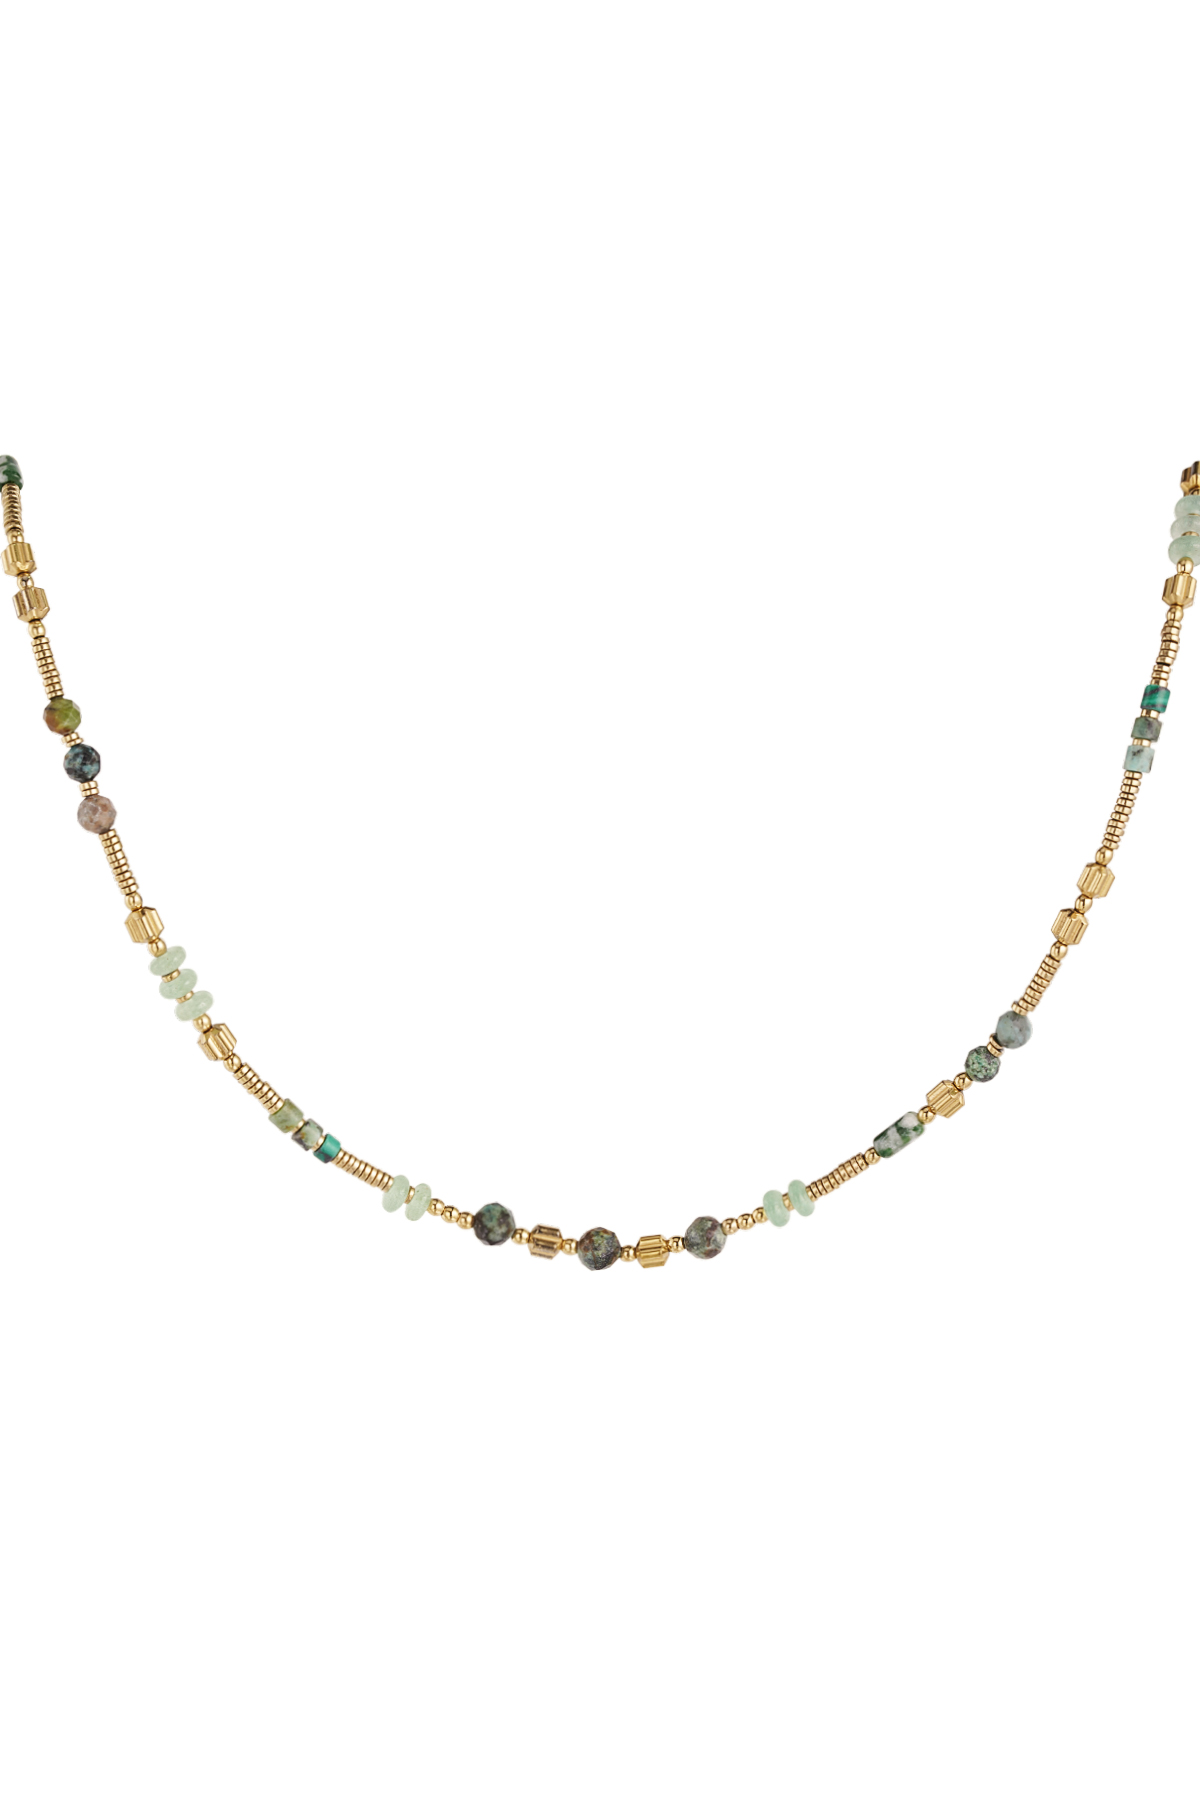 Necklace Stones &amp; Beads - Green &amp; Gold Stainless Steel